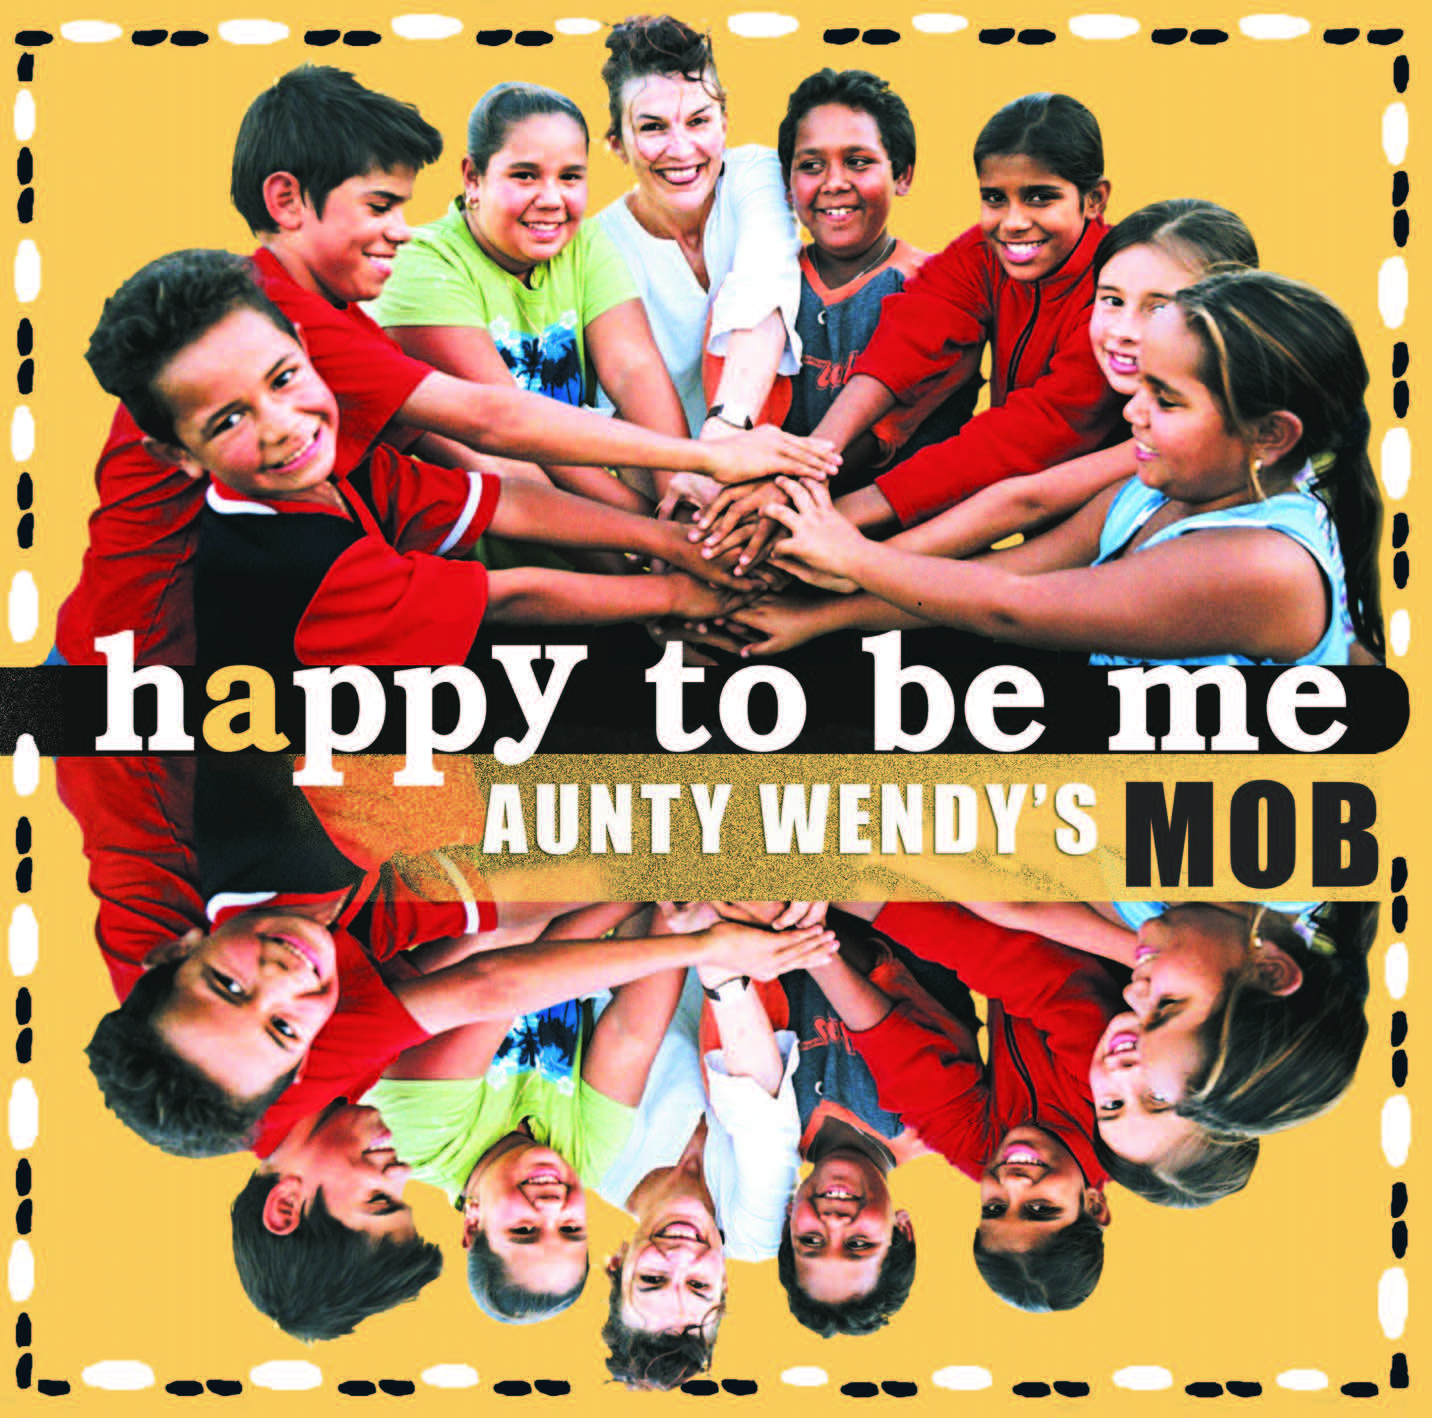 happy to be me CD COVER.jpg